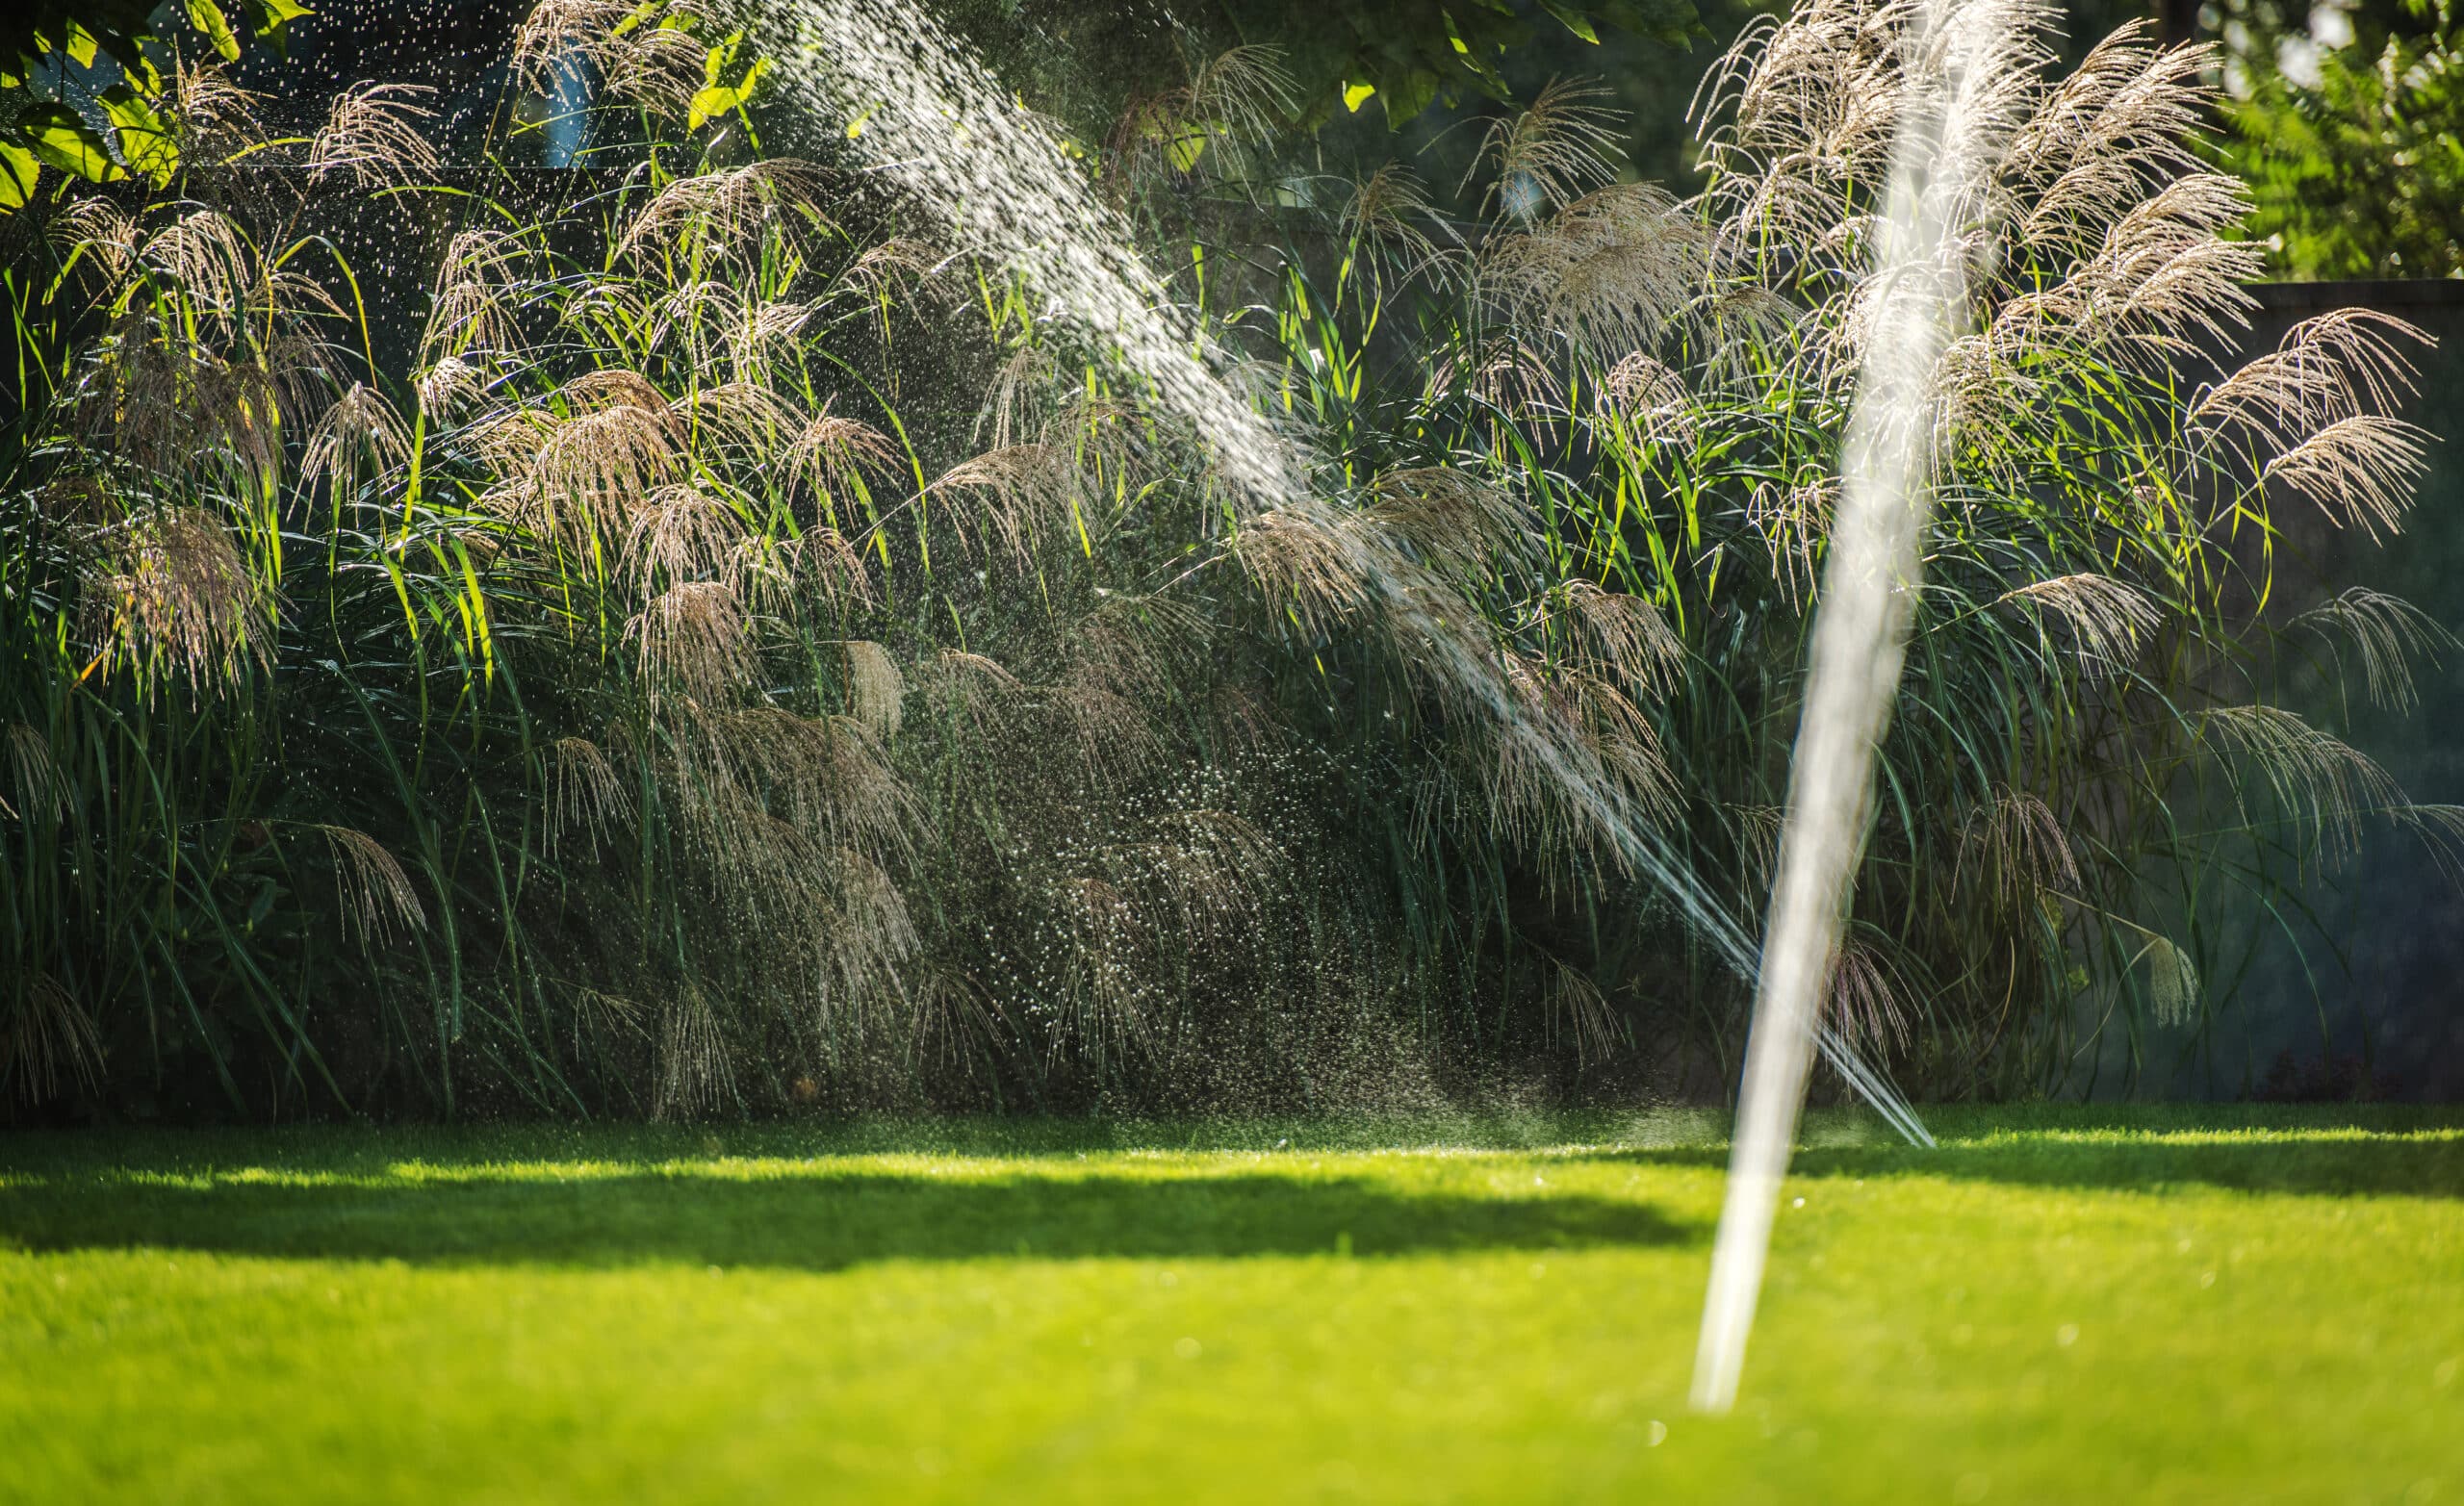 6 Exceptional Benefits Of Having A Residential Irrigation System 5 | residential backyard garden sprinklers irrigation 2022 12 16 11 50 48 utc scaled